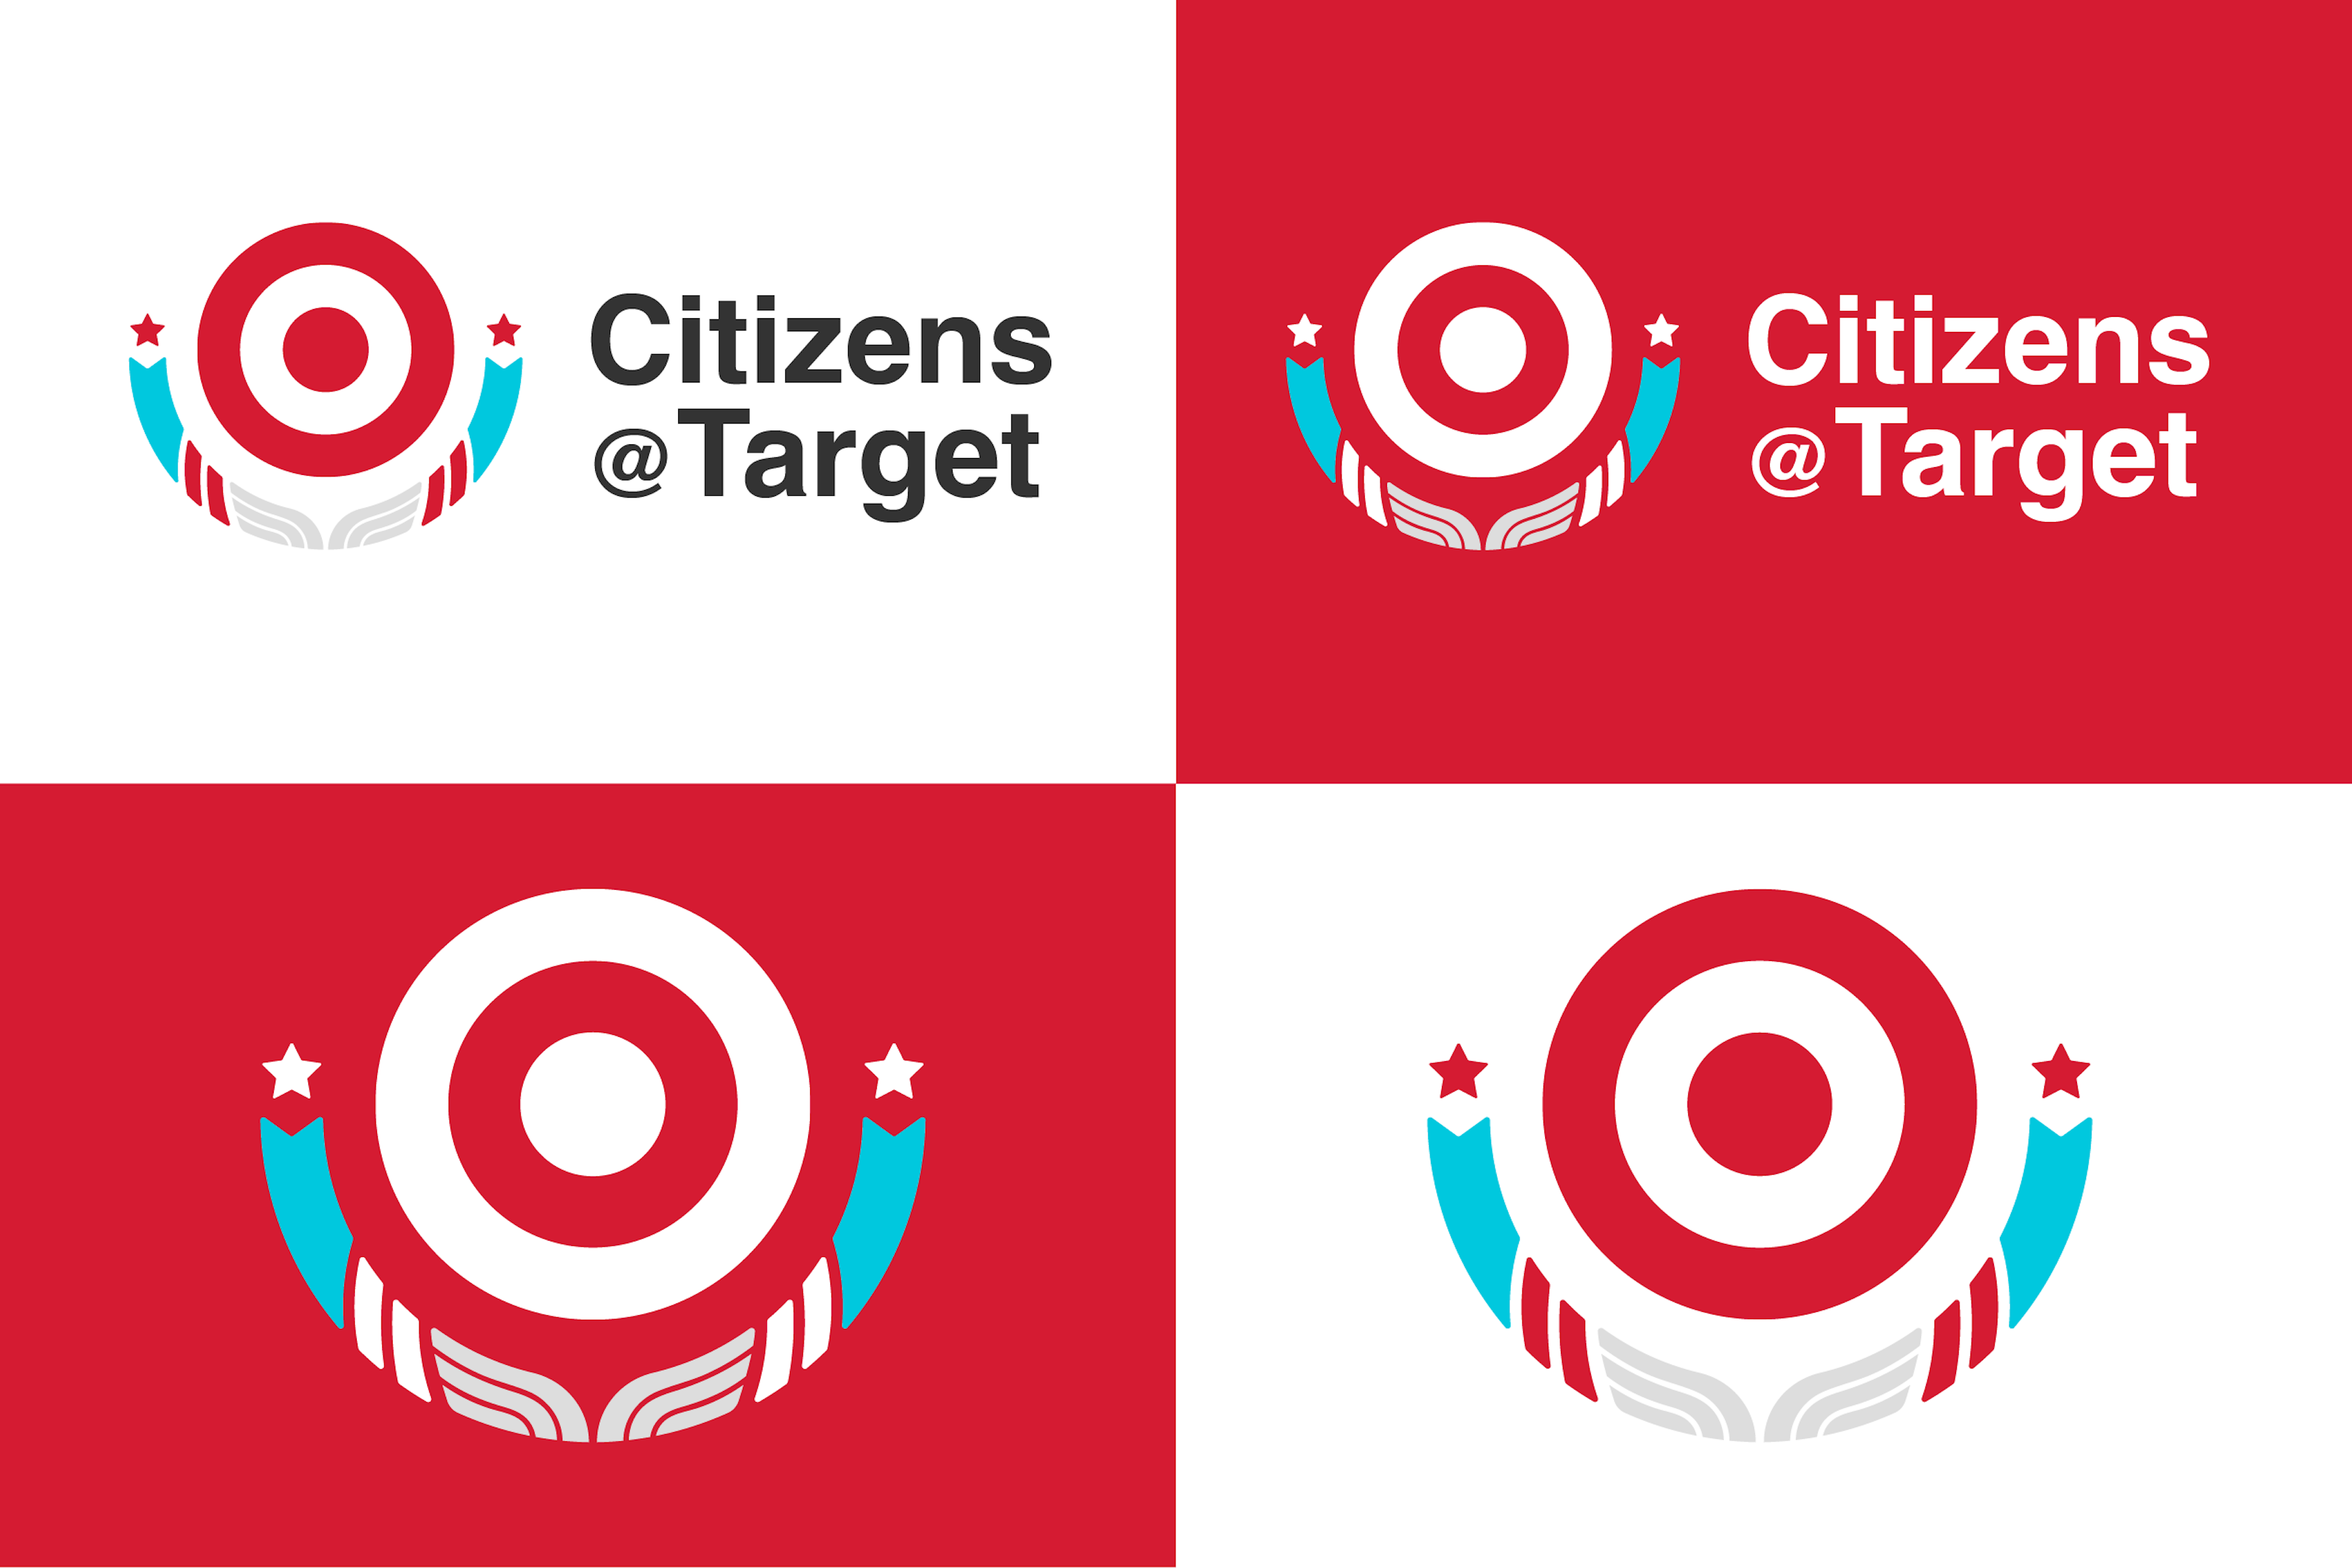 Citizens@Target logos in a 4x4 grid in red and white options